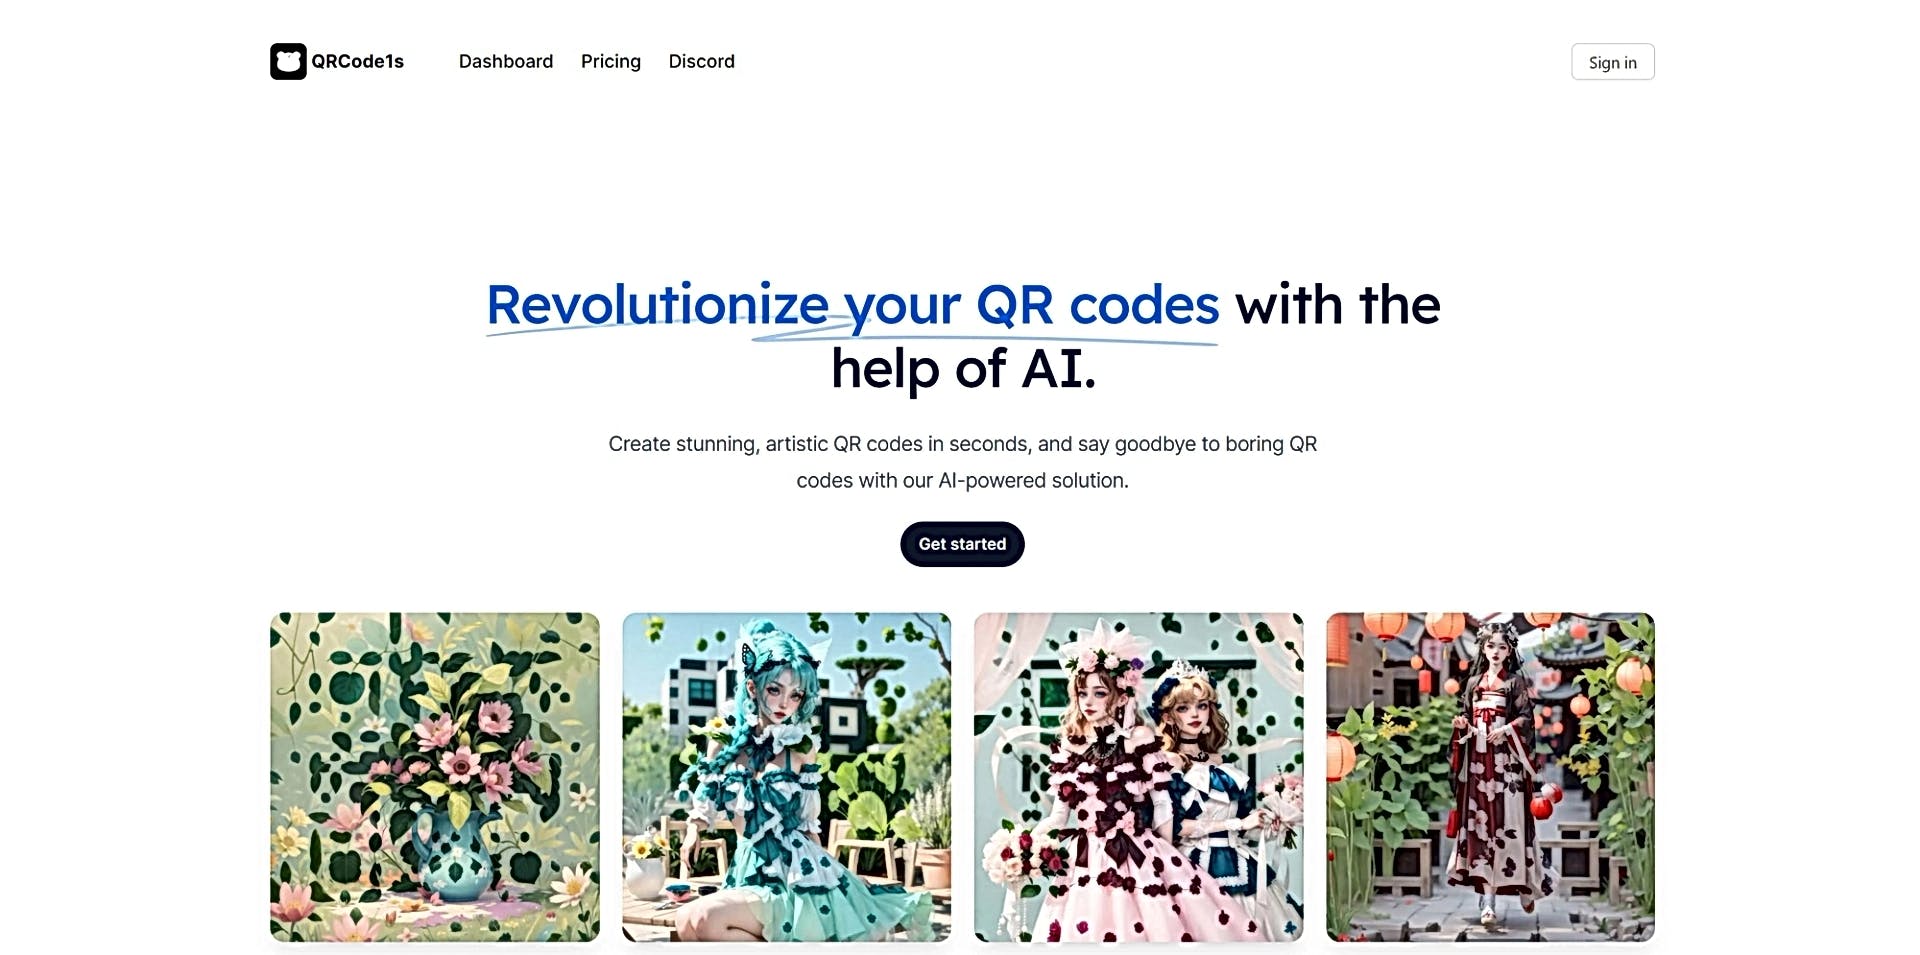 QRCode1s featured